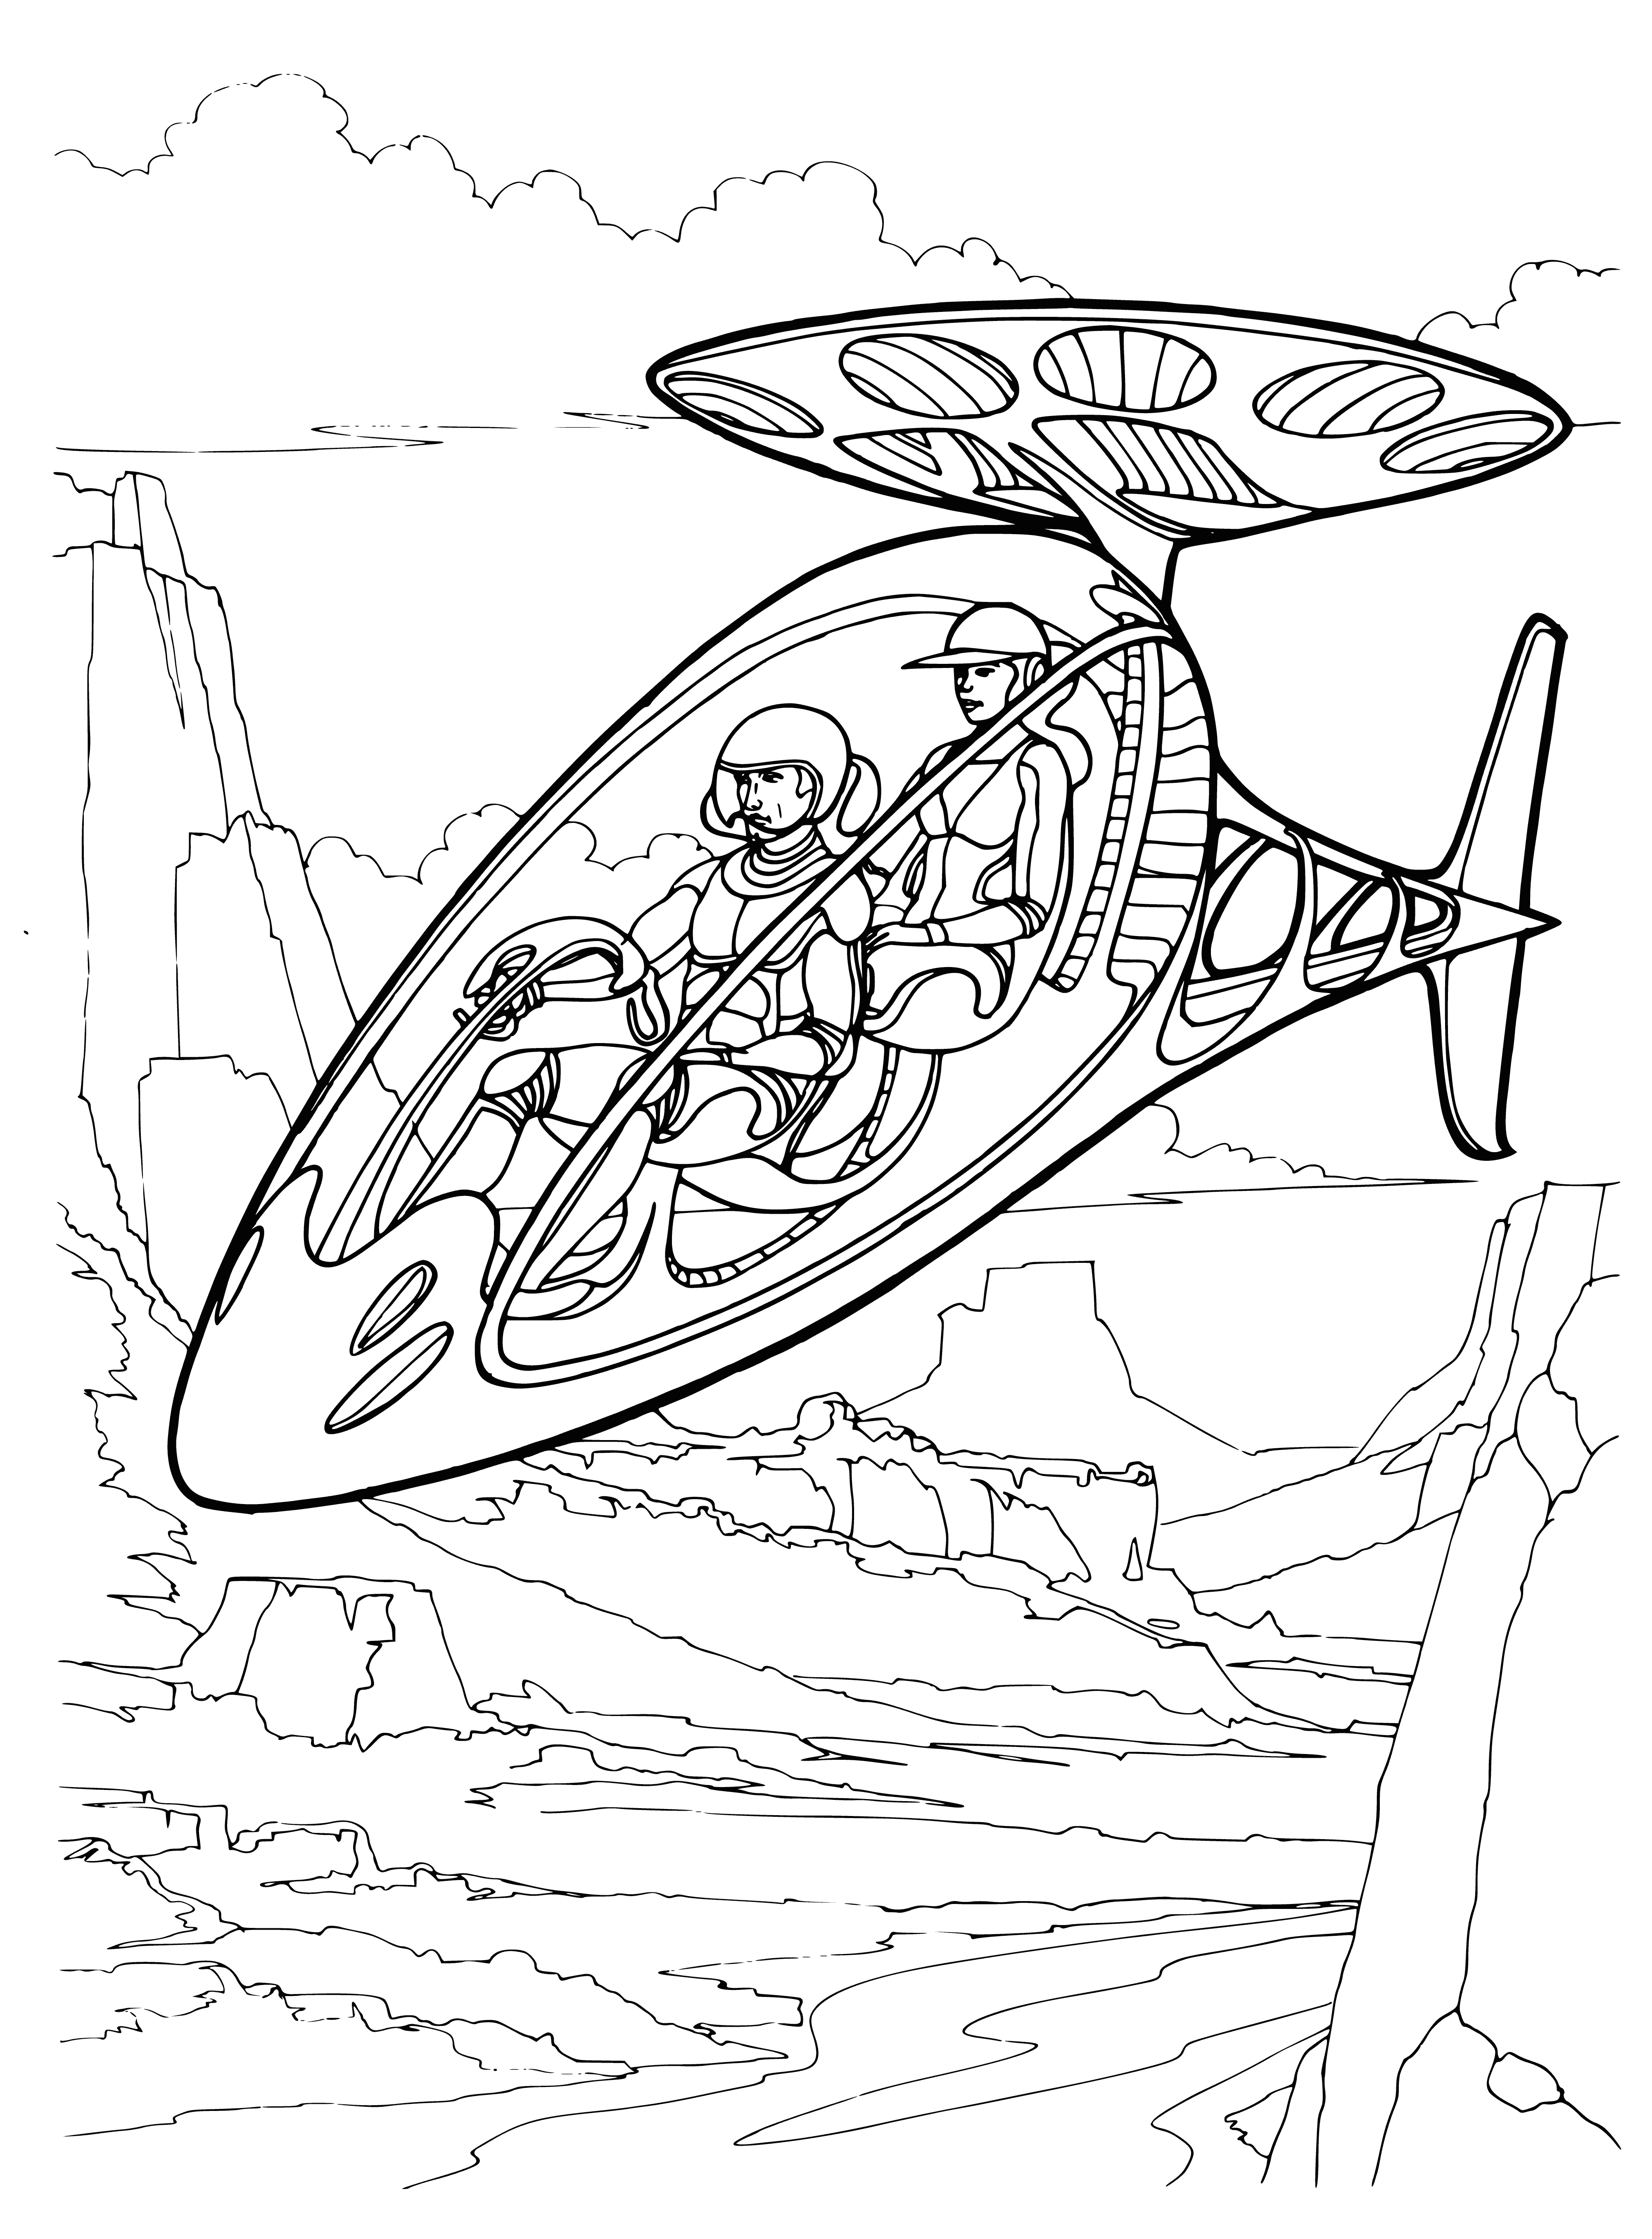 coloring page: An aircraft gains support from air to fly and counters gravity using dynamic or aerostatic lift.